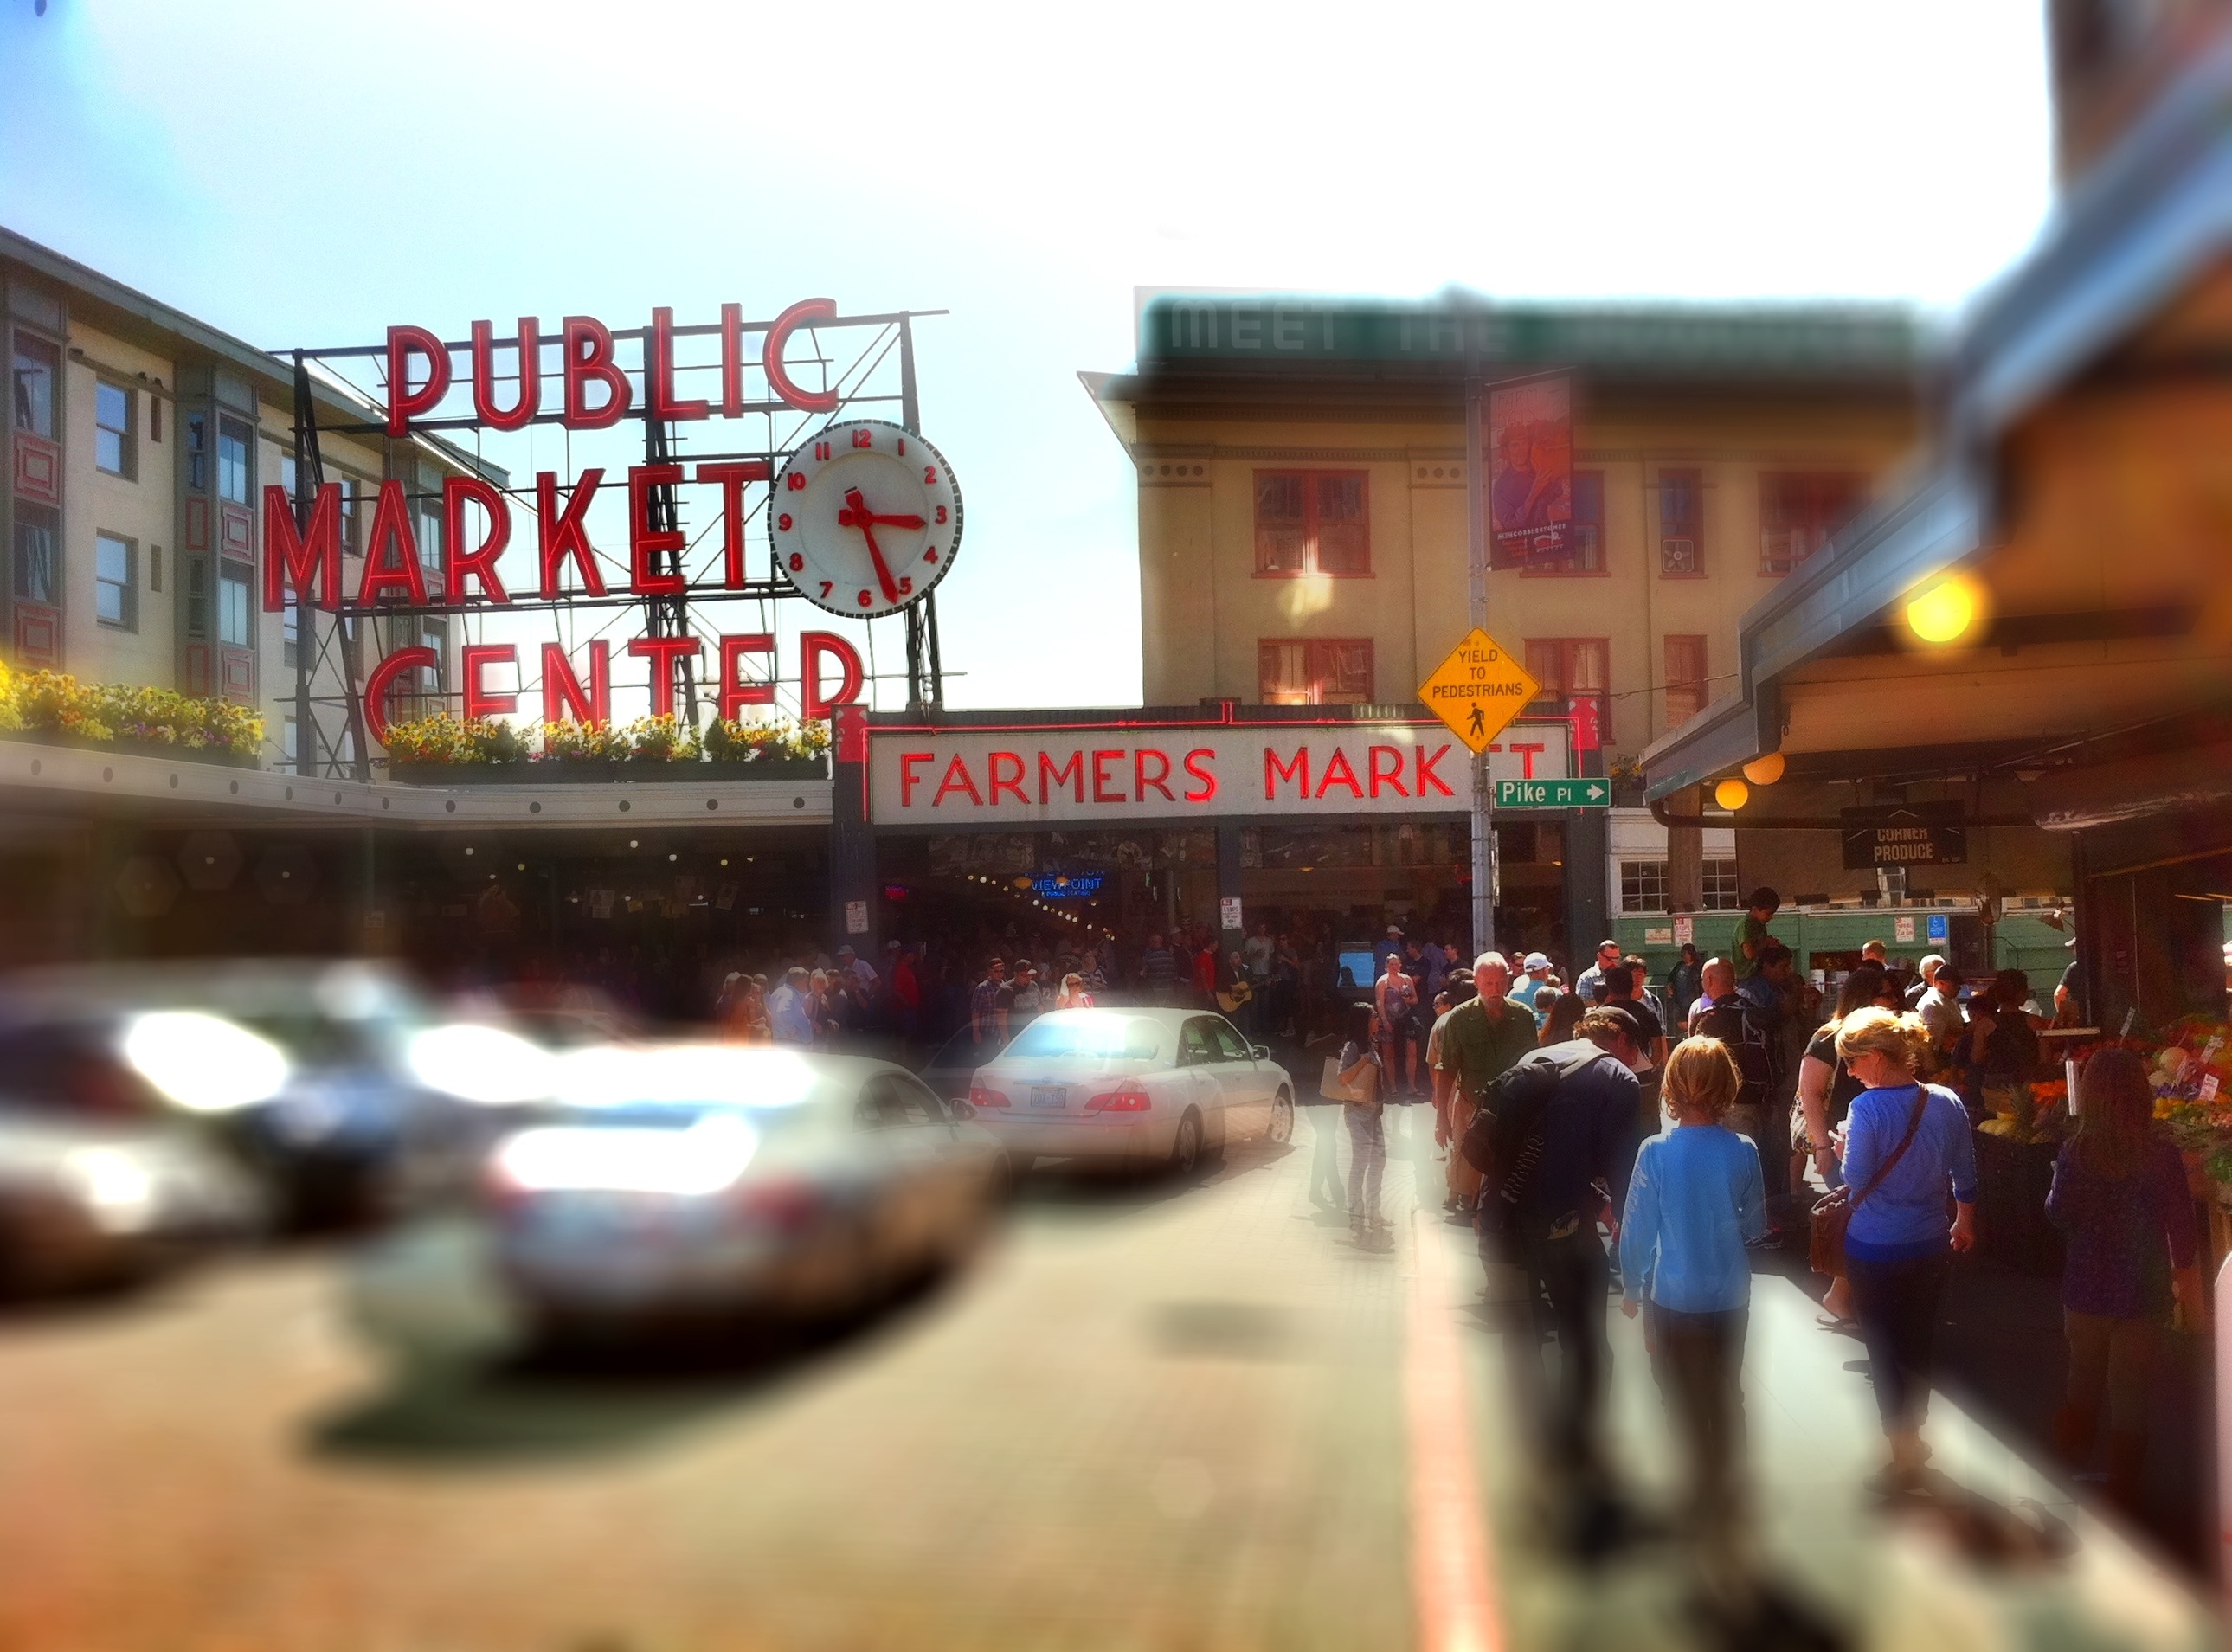 Day 330 – Pike’s Place Market